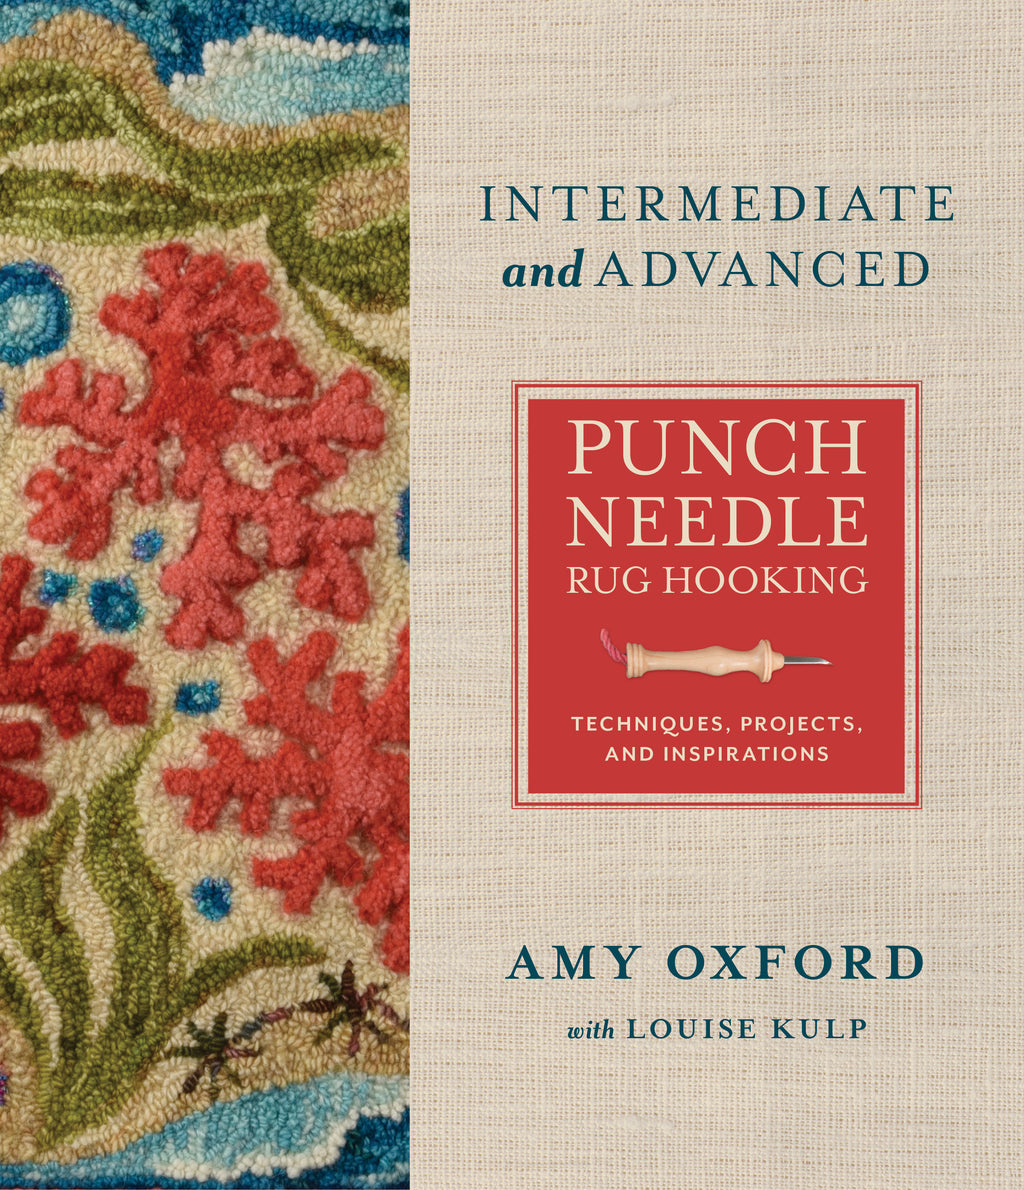 Amy Oxford and The Oxford Punch Needle,. - All Things EFFY